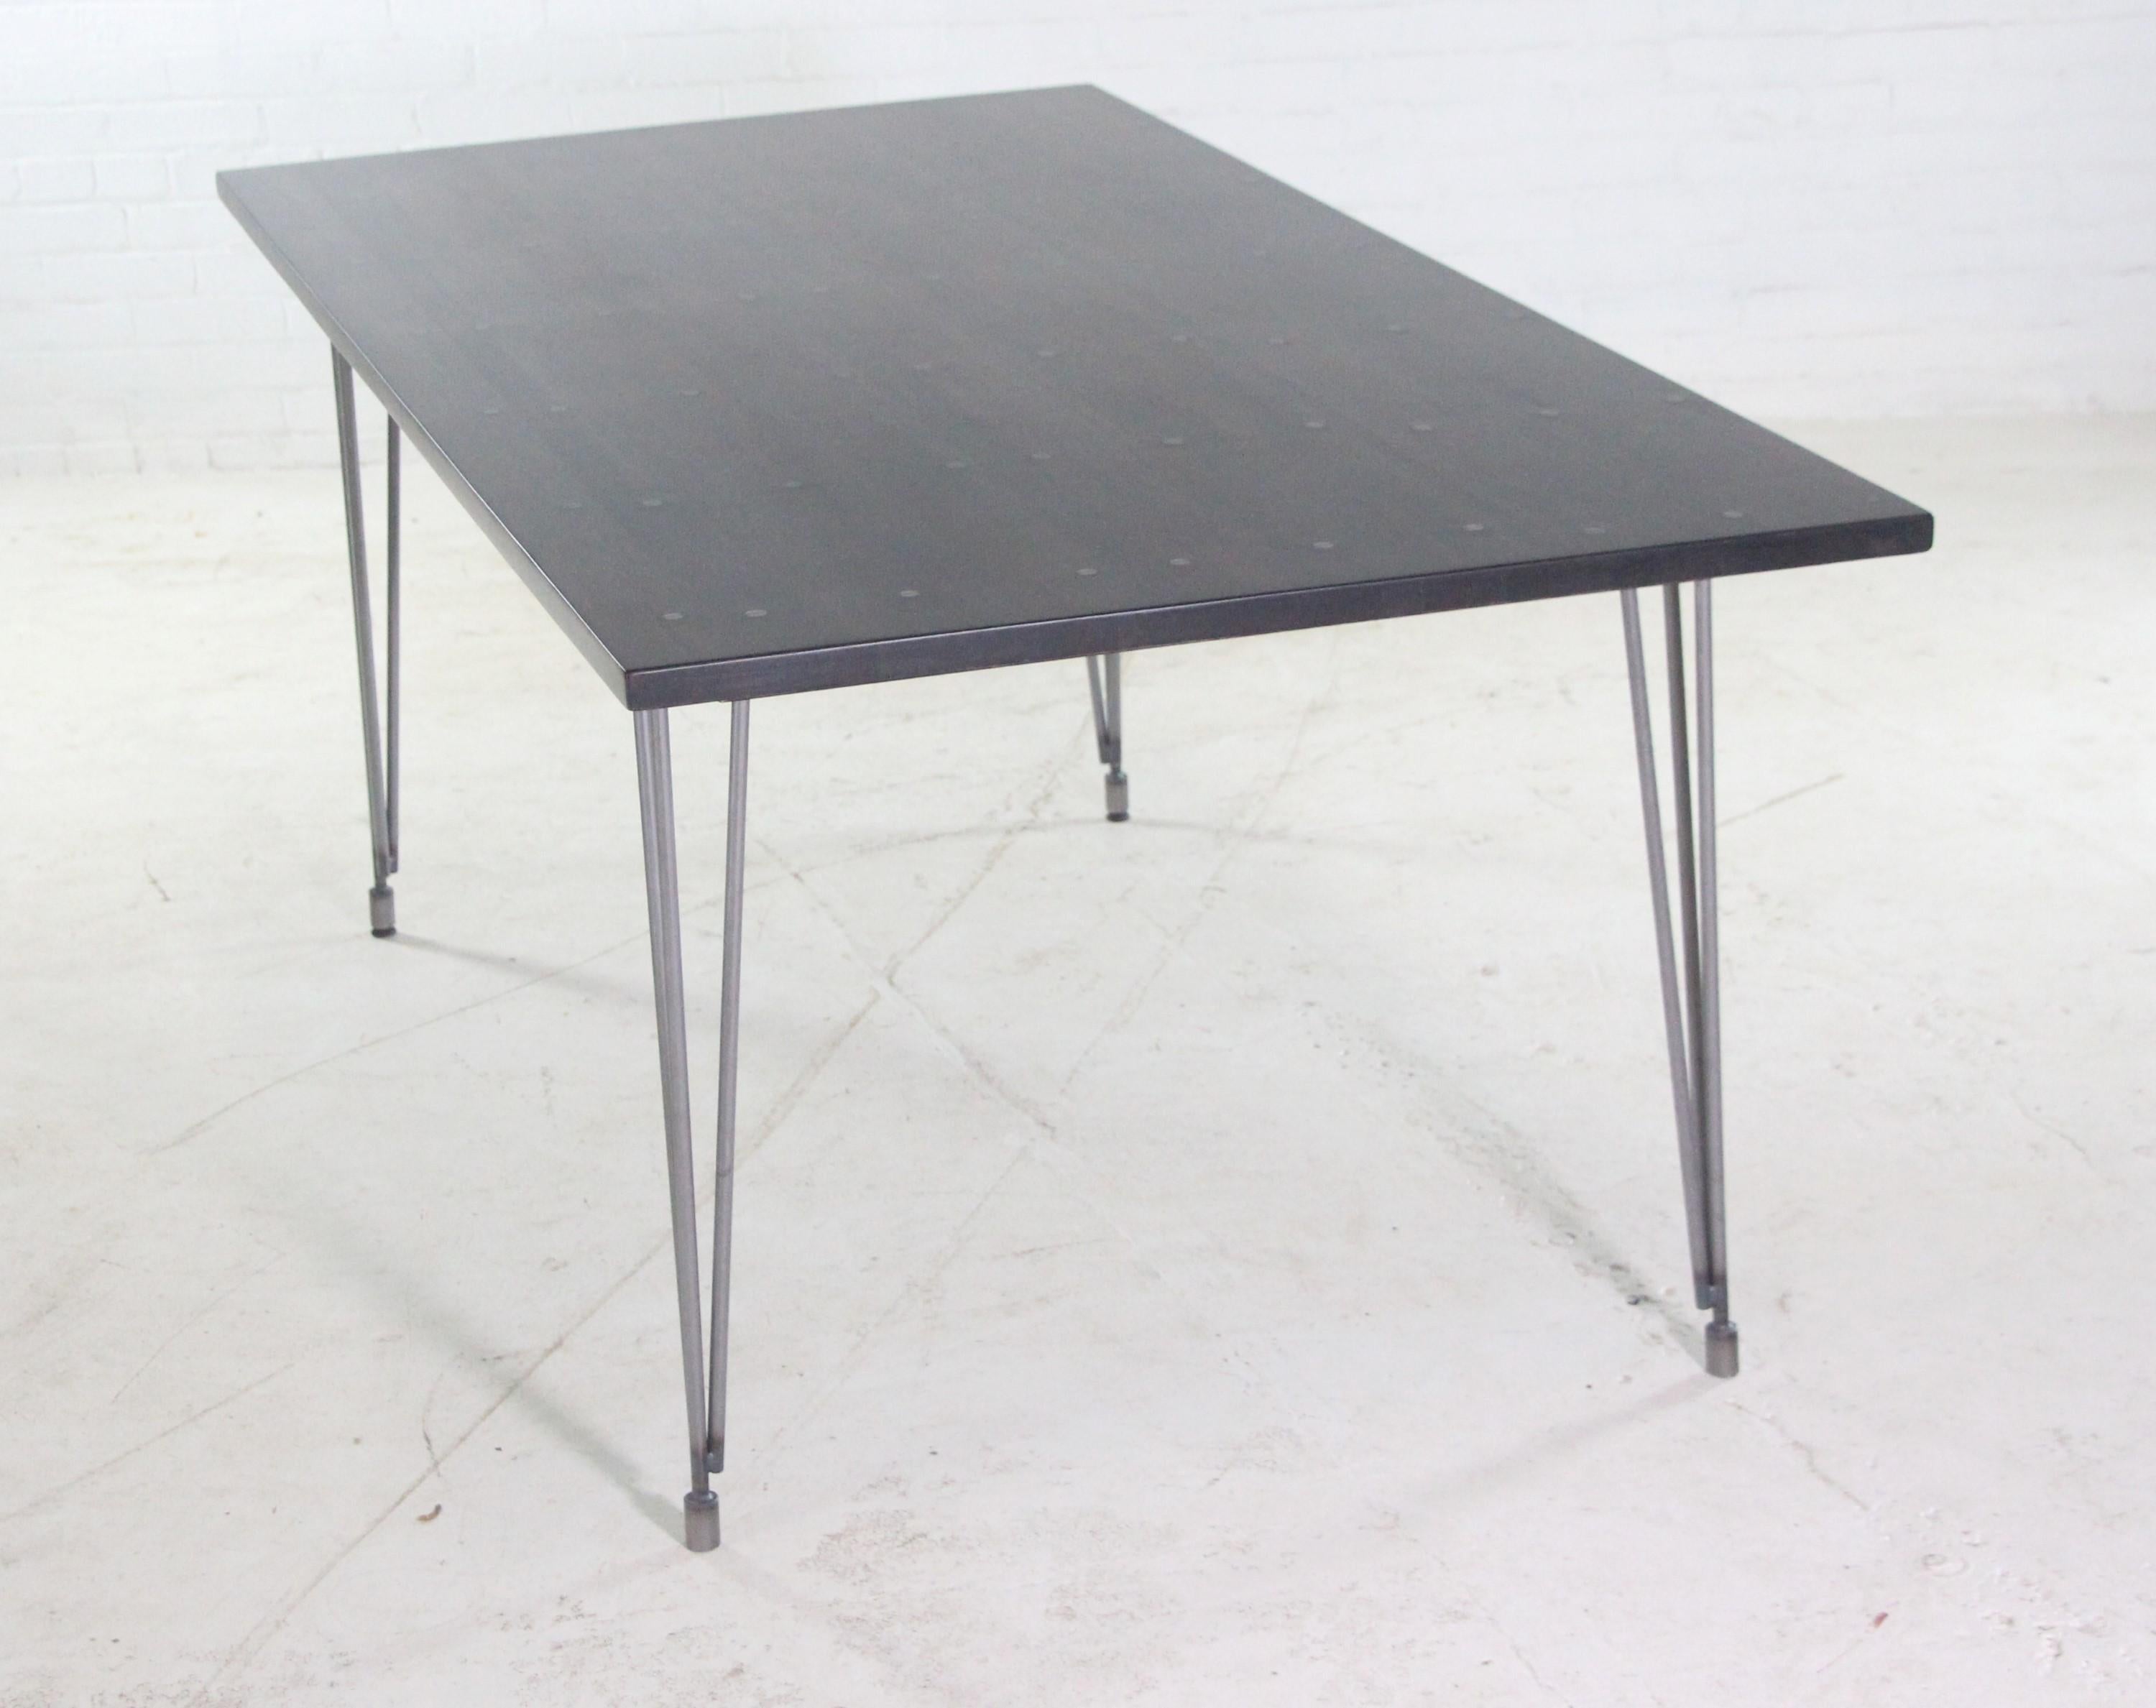 Handmade industrial flooring oak tabletop in an ebony stain paired with hairpin legs. This table is ready to ship. Please note, this item is located in our Los Angeles location.